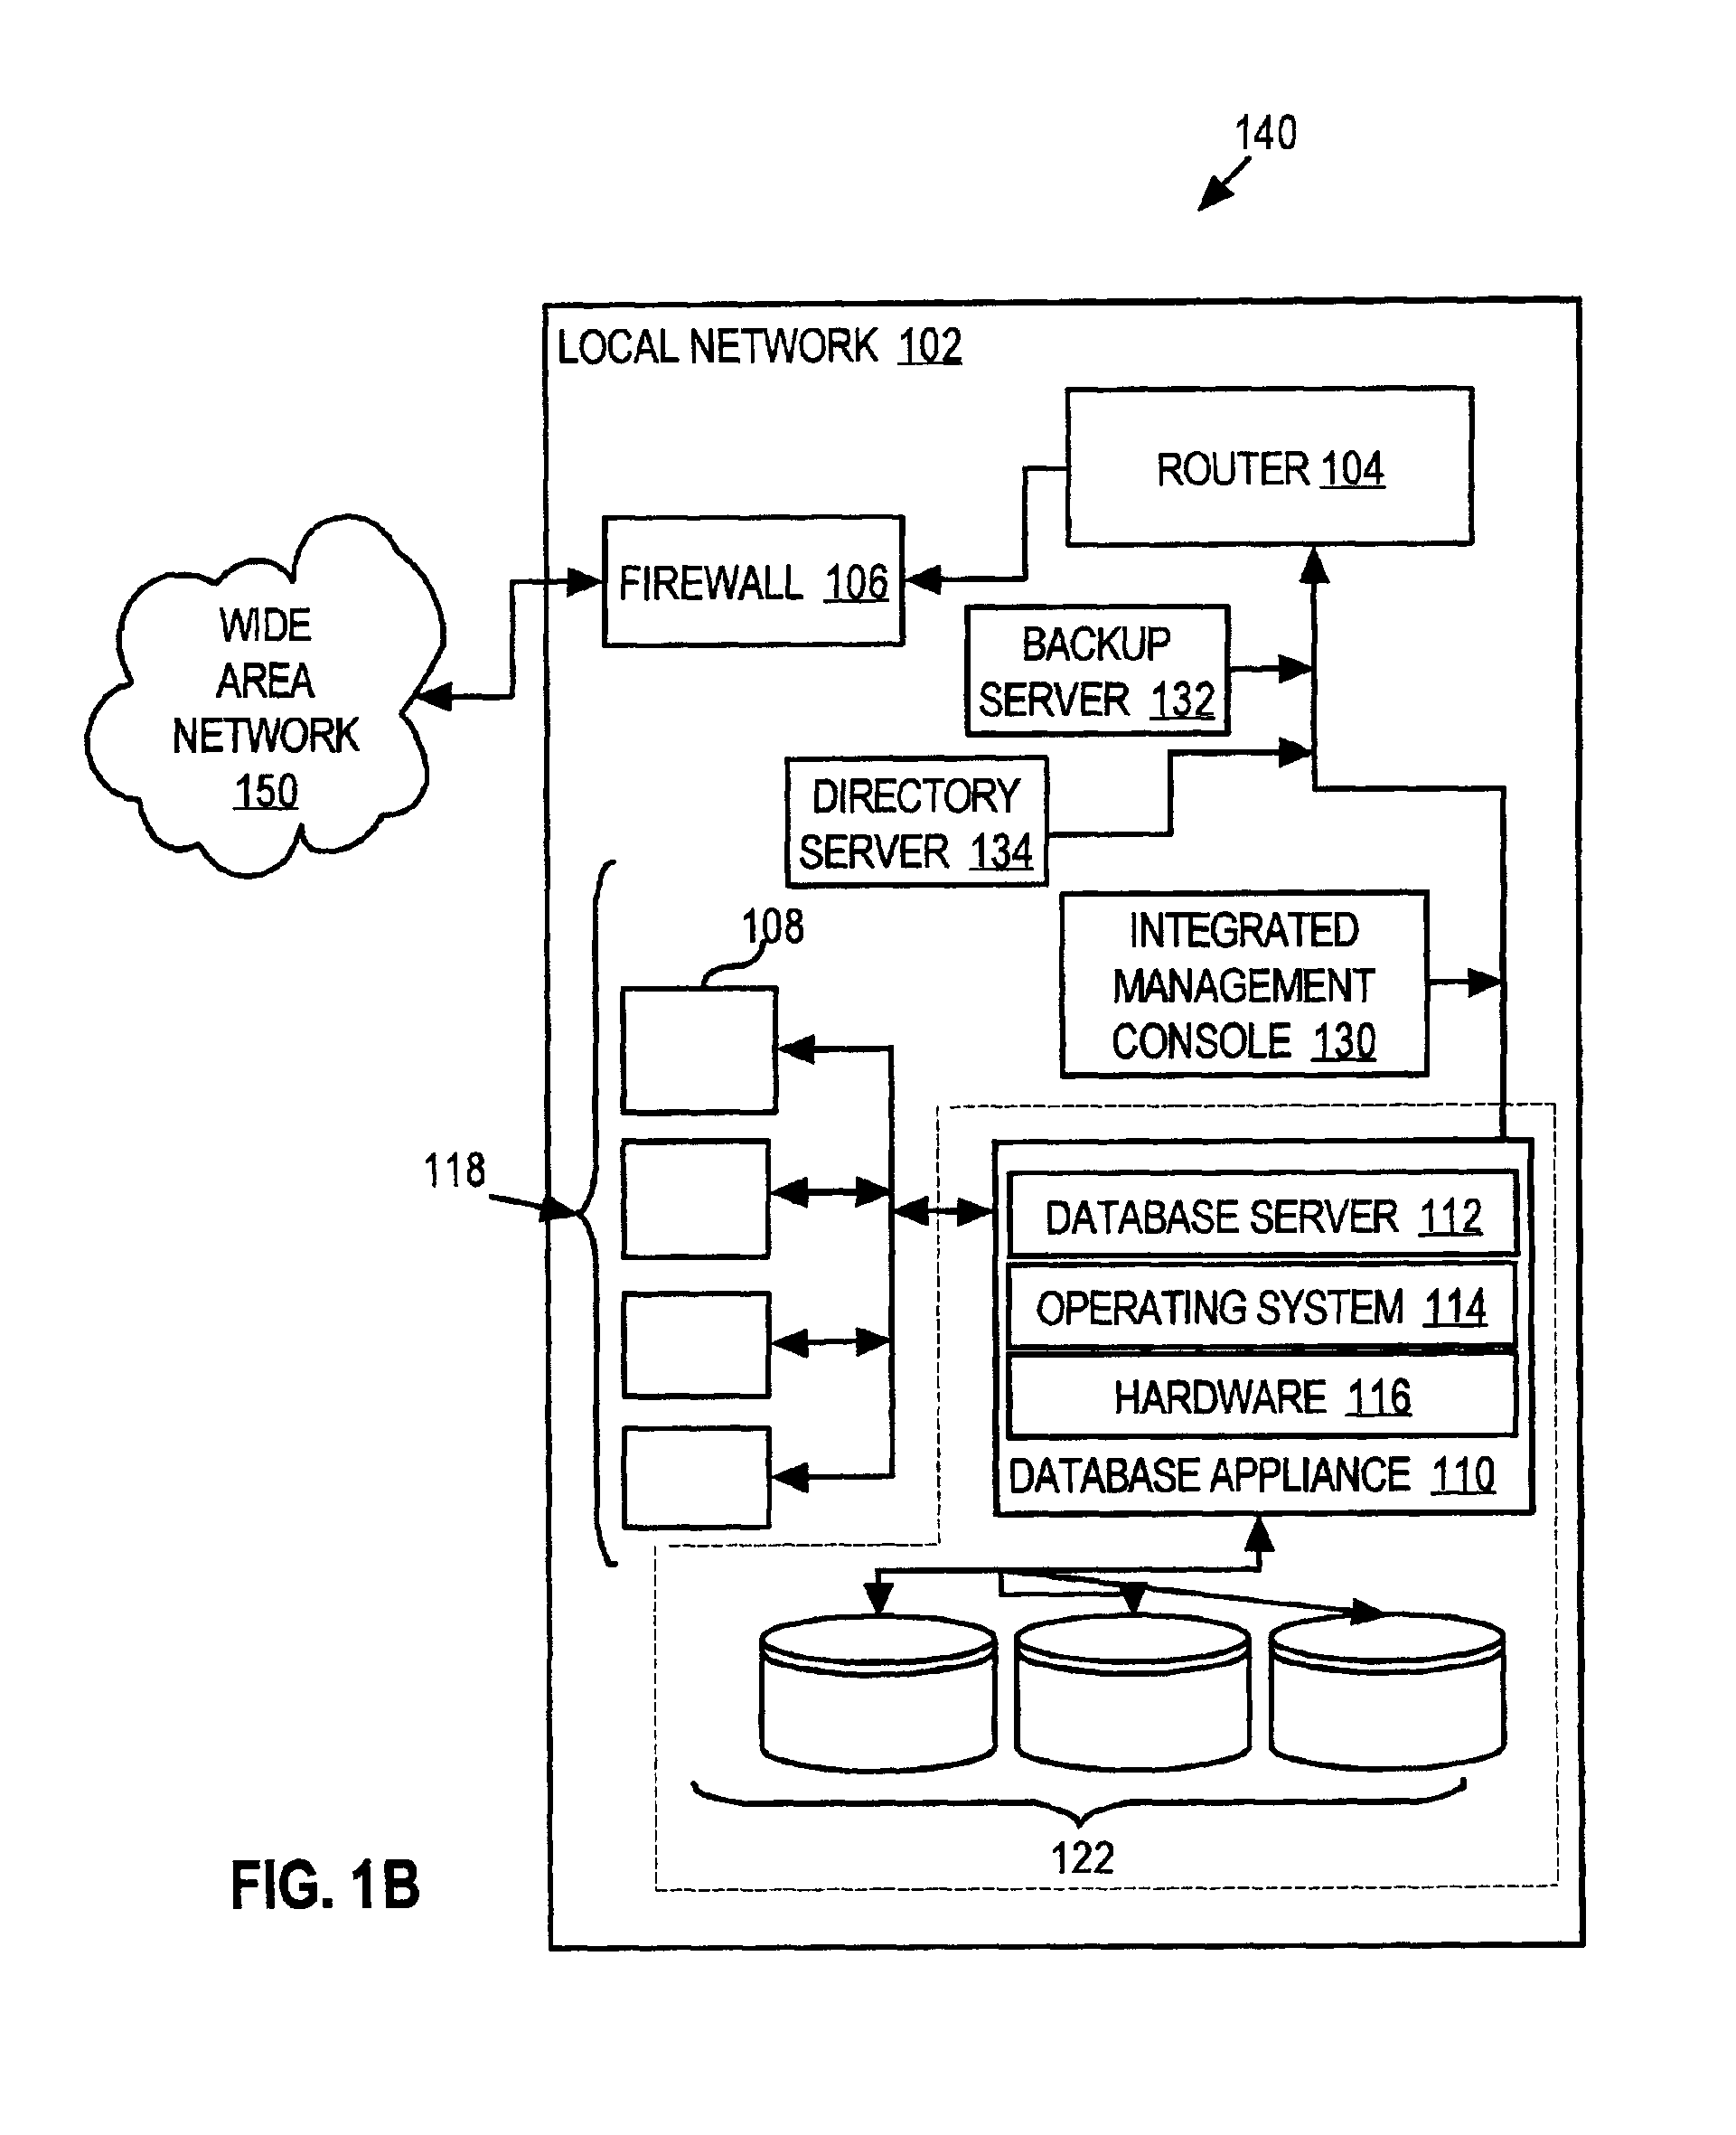 Techniques for managing configuration for a system of devices arranged in a network